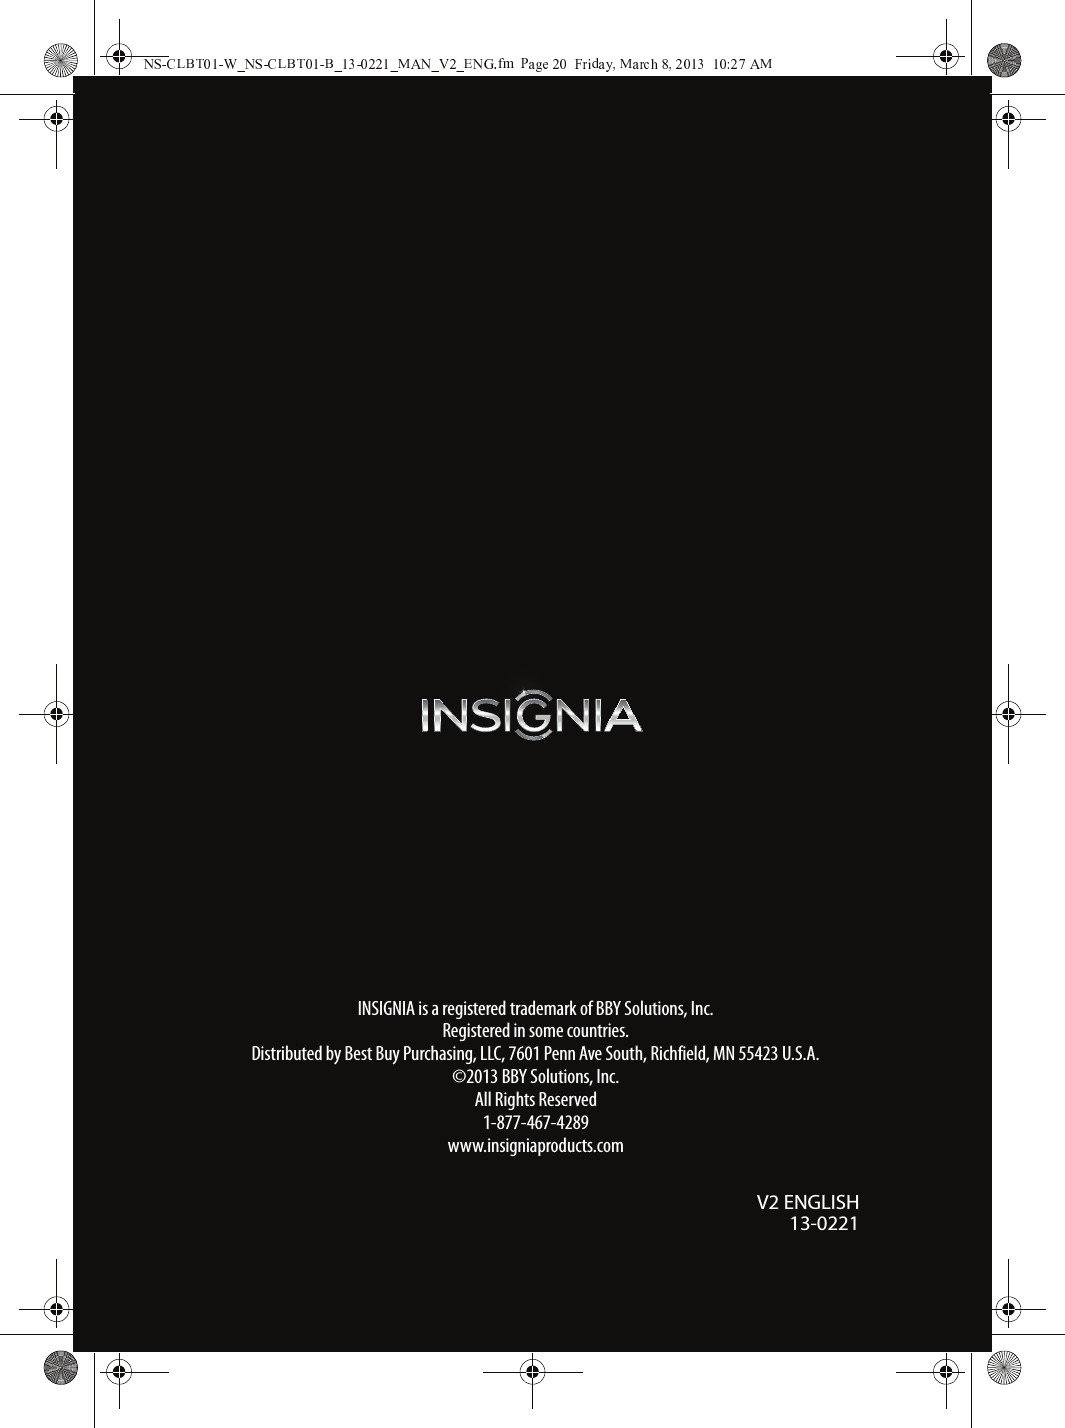 INSIGNIA is a registered trademark of BBY Solutions, Inc. Registered in some countries.Distributed by Best Buy Purchasing, LLC, 7601 Penn Ave South, Richfield, MN 55423 U.S.A.©2013 BBY Solutions, Inc.All Rights Reserved1-877-467-4289www.insigniaproducts.comV2 ENGLISH13-0221